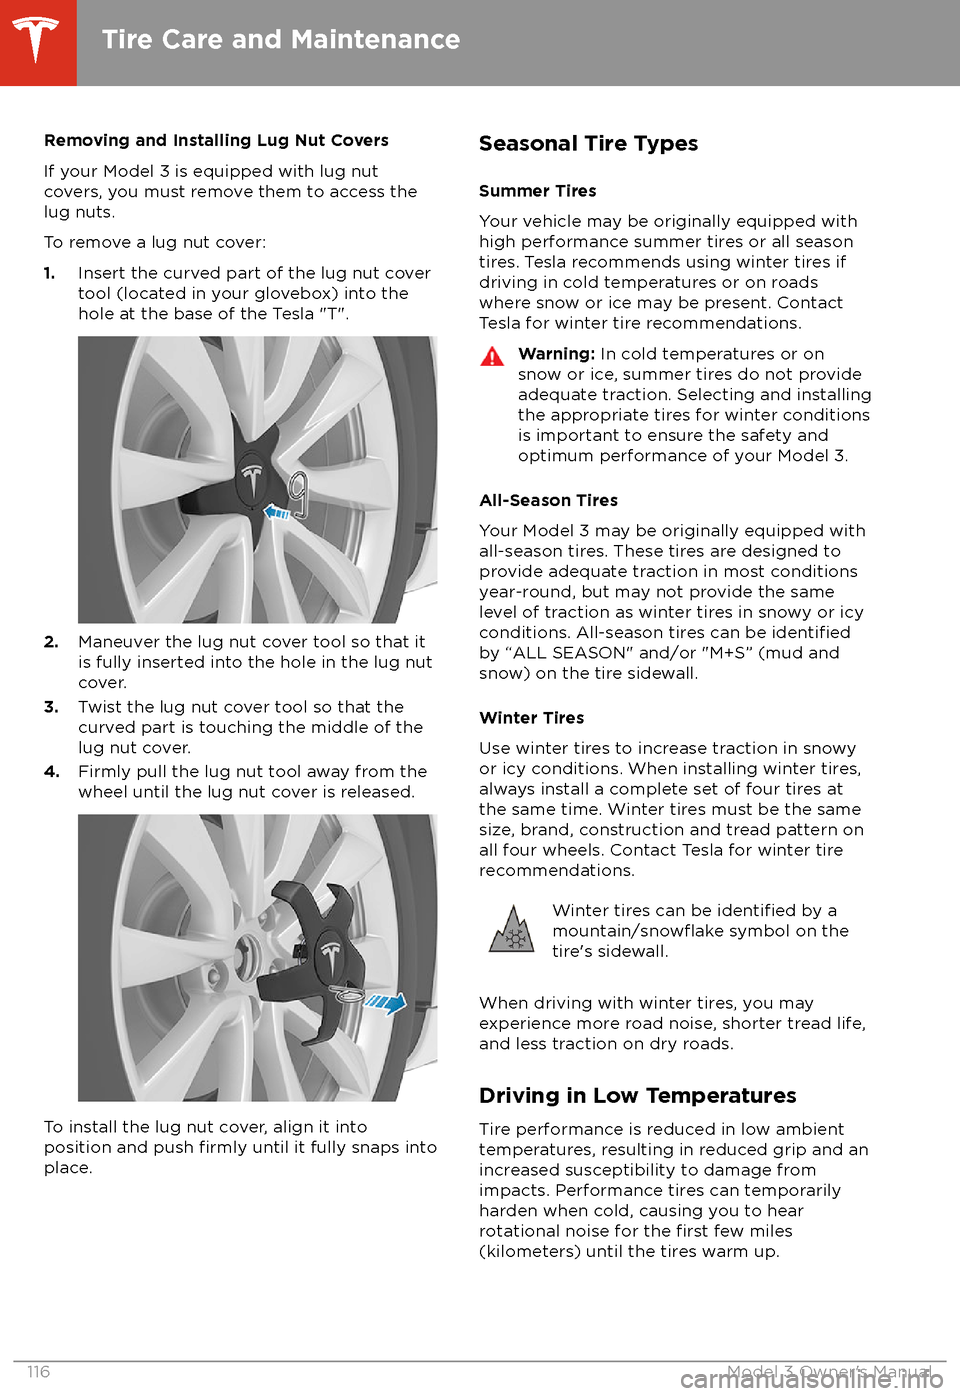 TESLA MODEL 3 2018 Owners Guide Removing and Installing Lug Nut Covers
If your Model 3 is equipped with lug nut covers, you must remove them to access the
lug nuts.
To remove a lug nut cover:
1. Insert the curved part of the lug nut